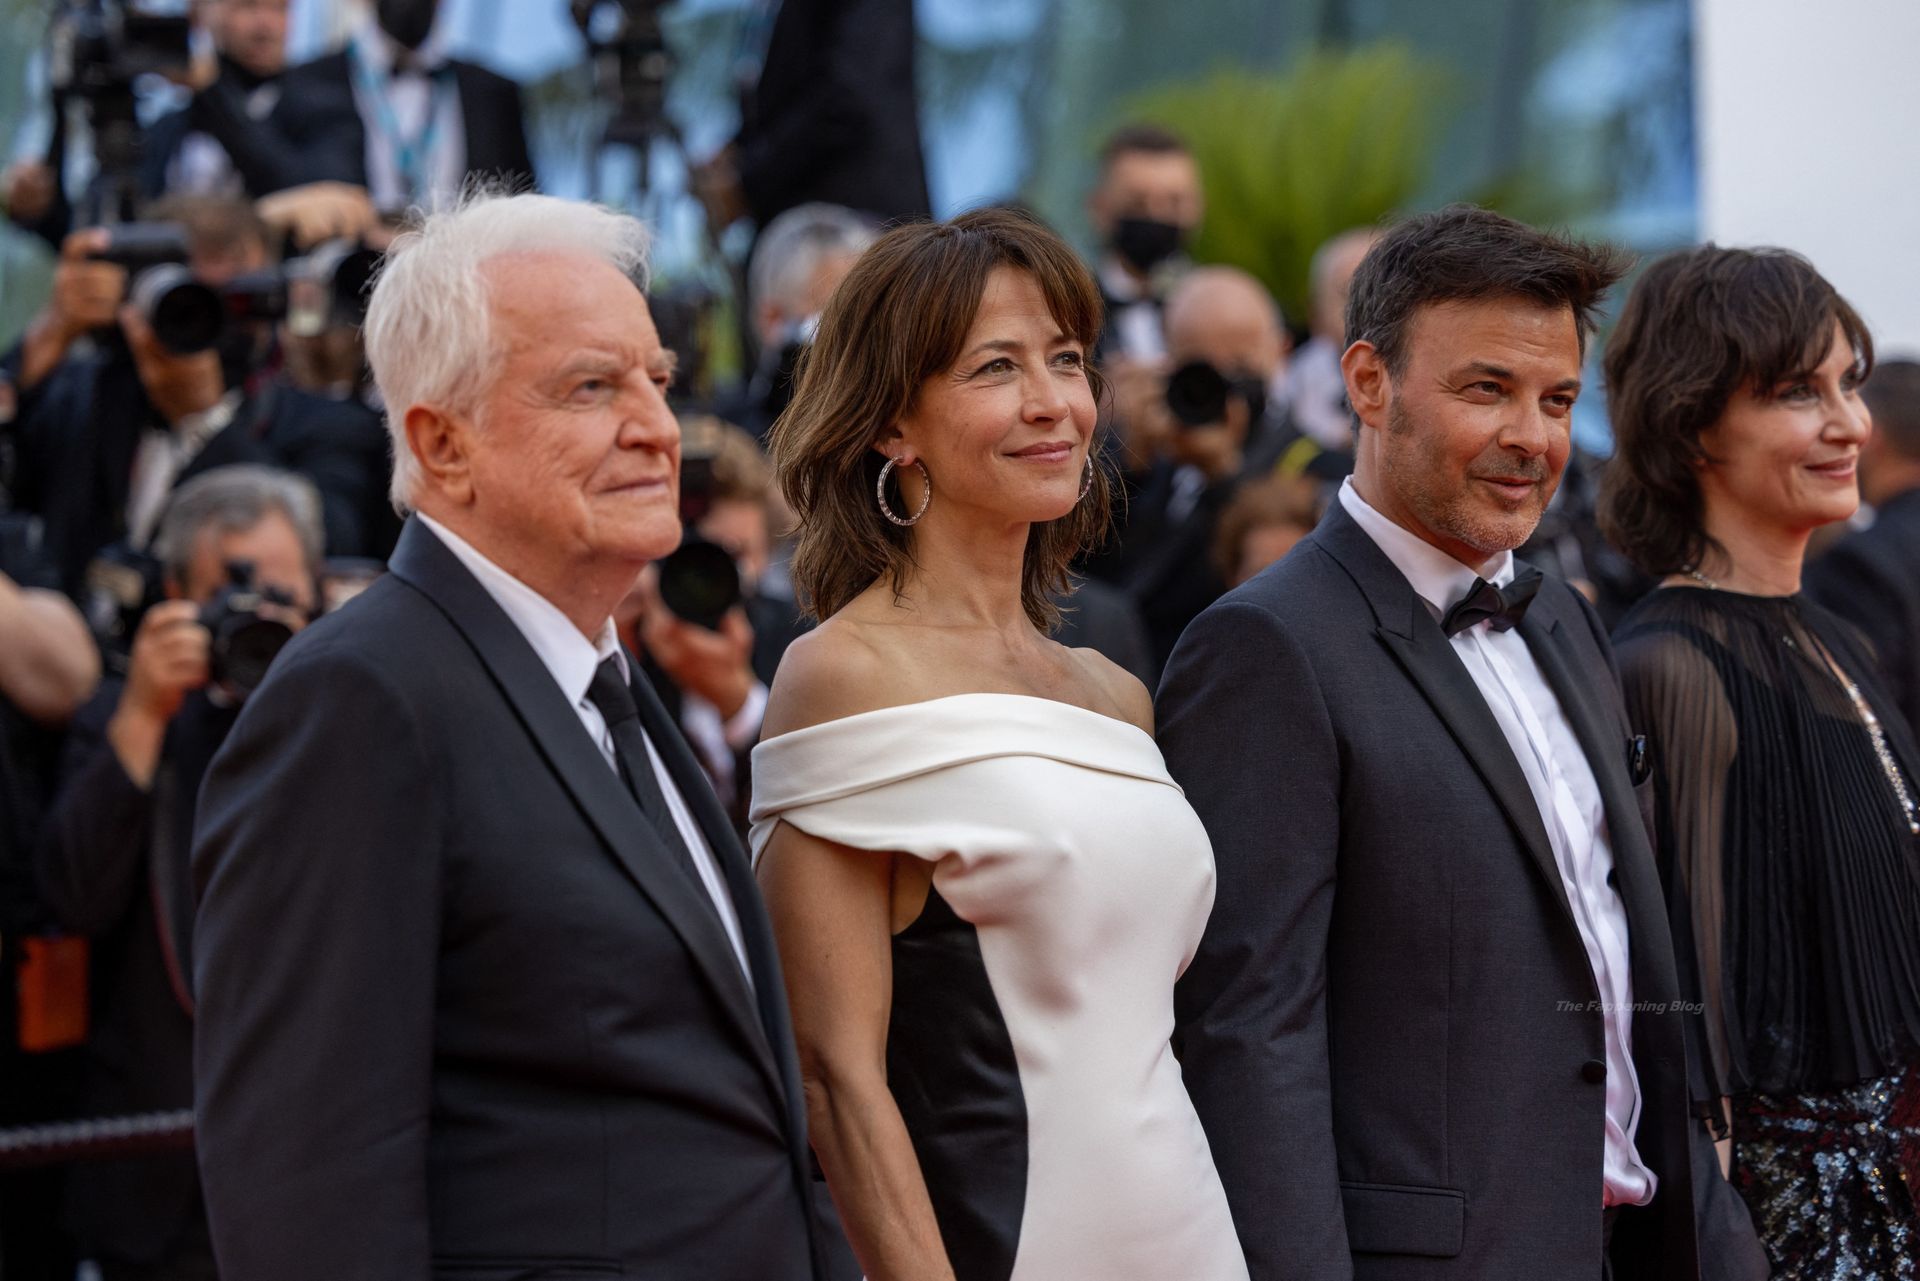 Sophie Marceau Shows Off Her Pokies at the 74th Cannes Film Fest
ival (138 Photos)